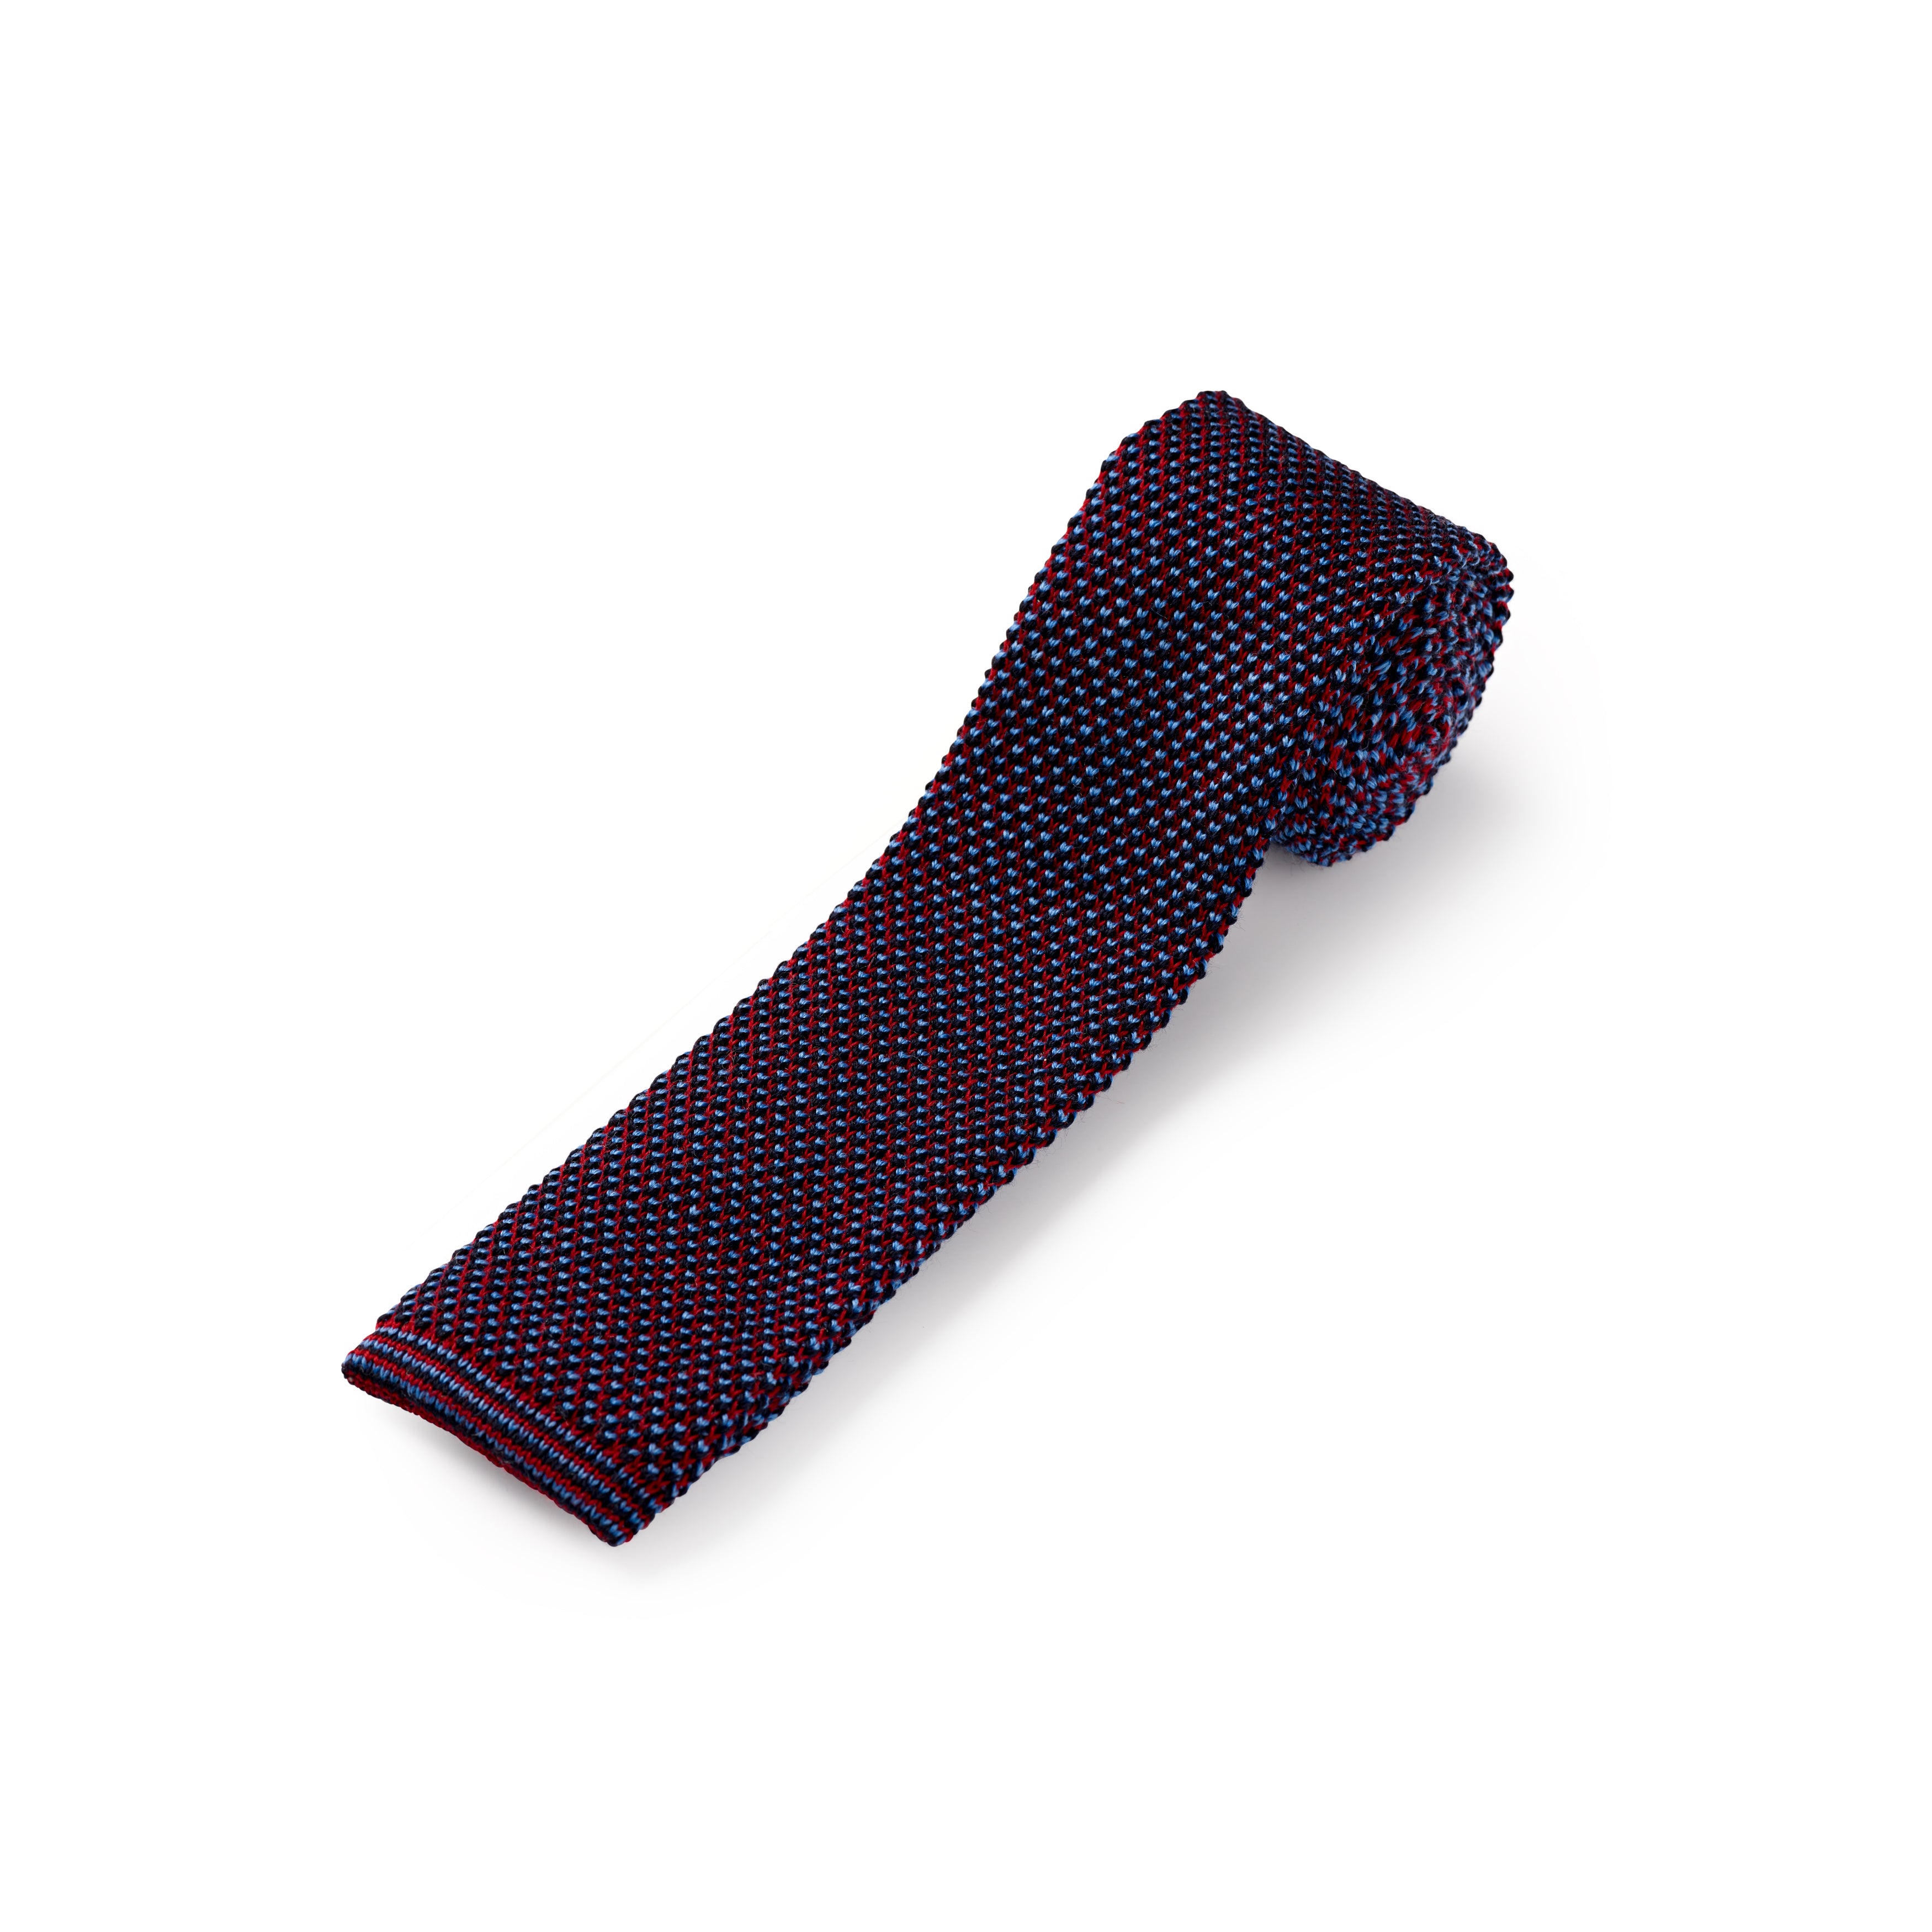 Crimson Red, Sky Blue and Black Spot Wool Knitted Tie